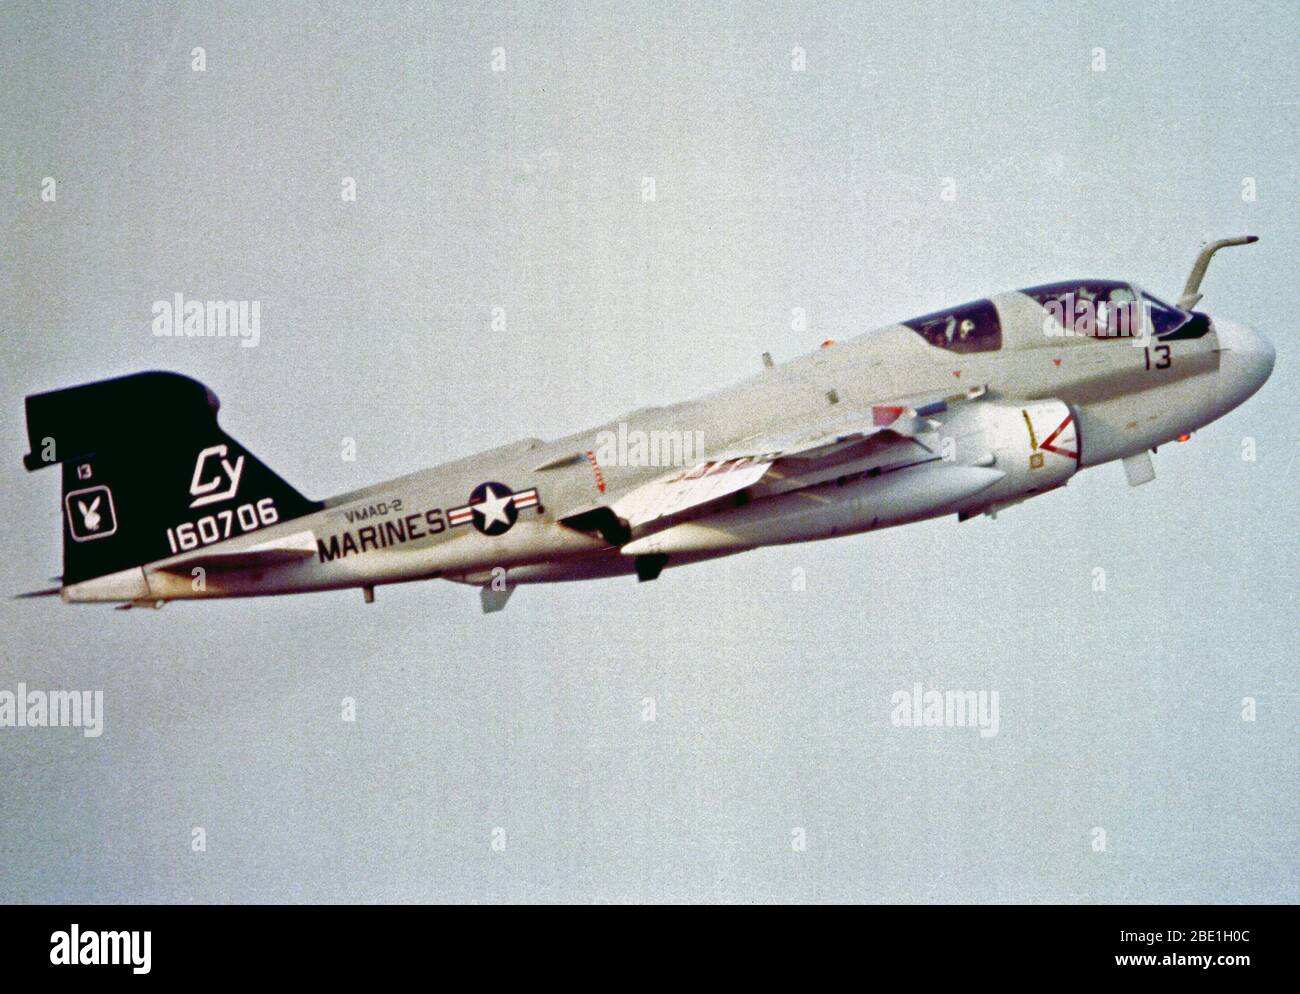 1980 - An air-to-air right side view of a Marine EA-6B prowler aircraft during Exercise Cope North '80 Stock Photo